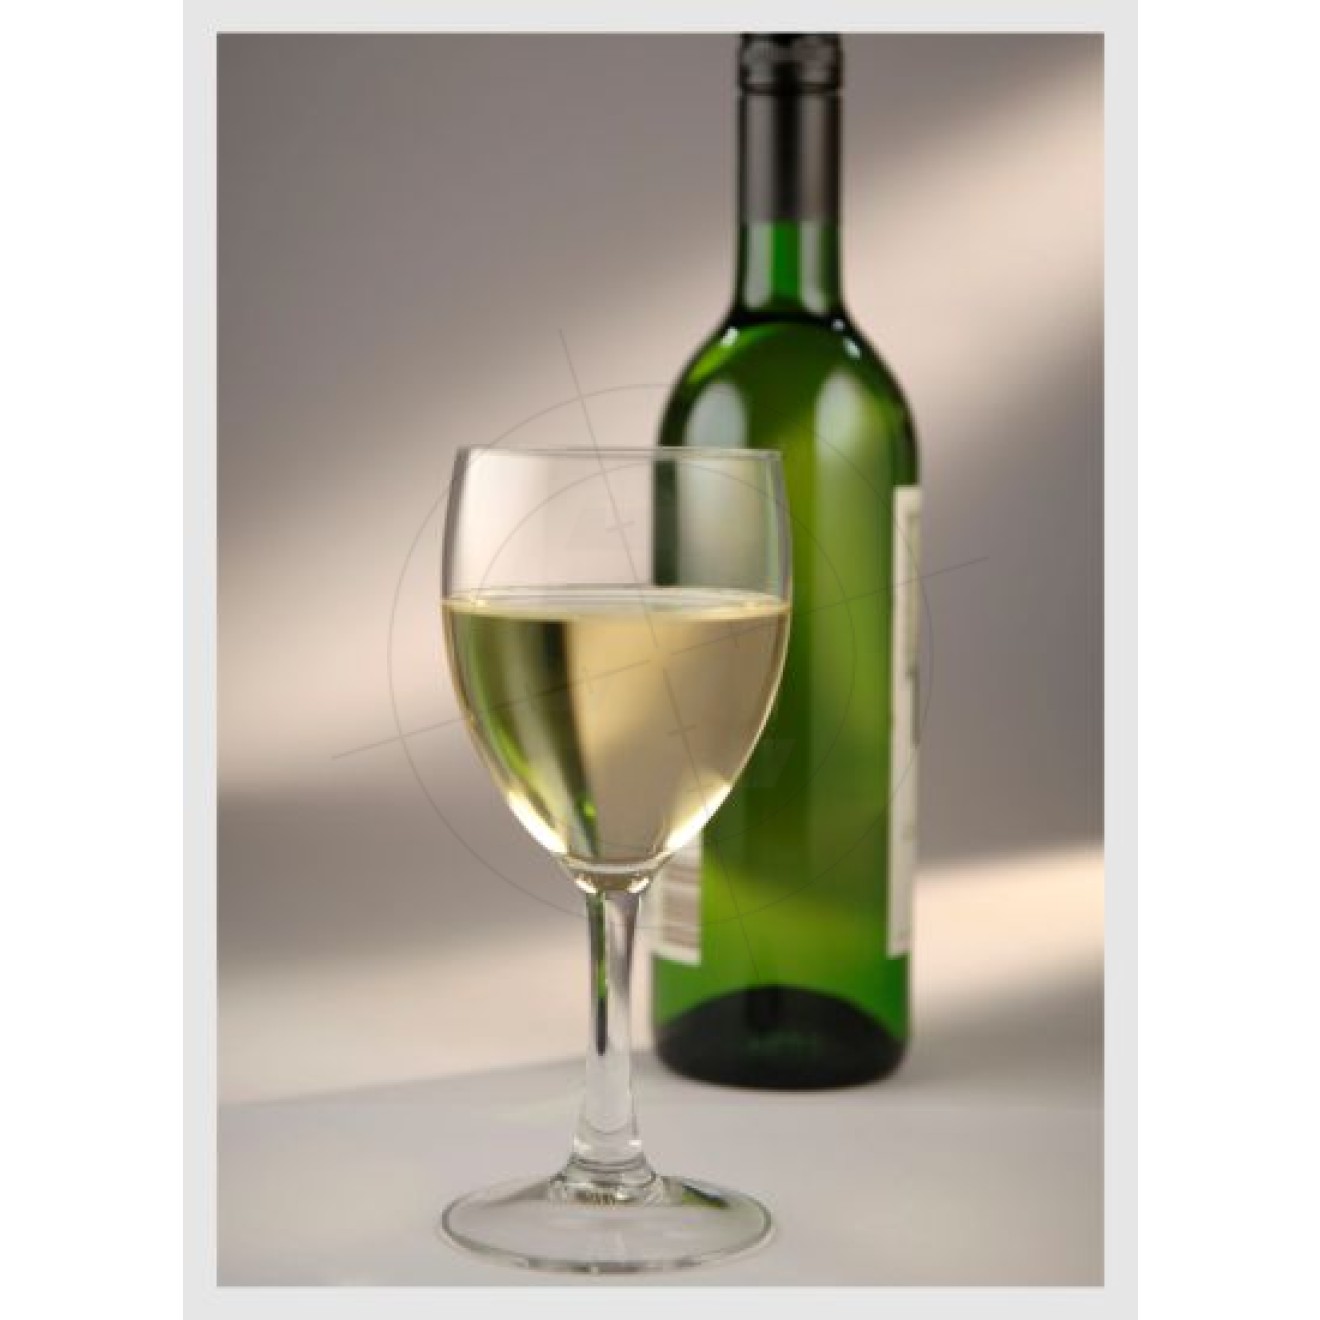 Wine bottle and wine glass